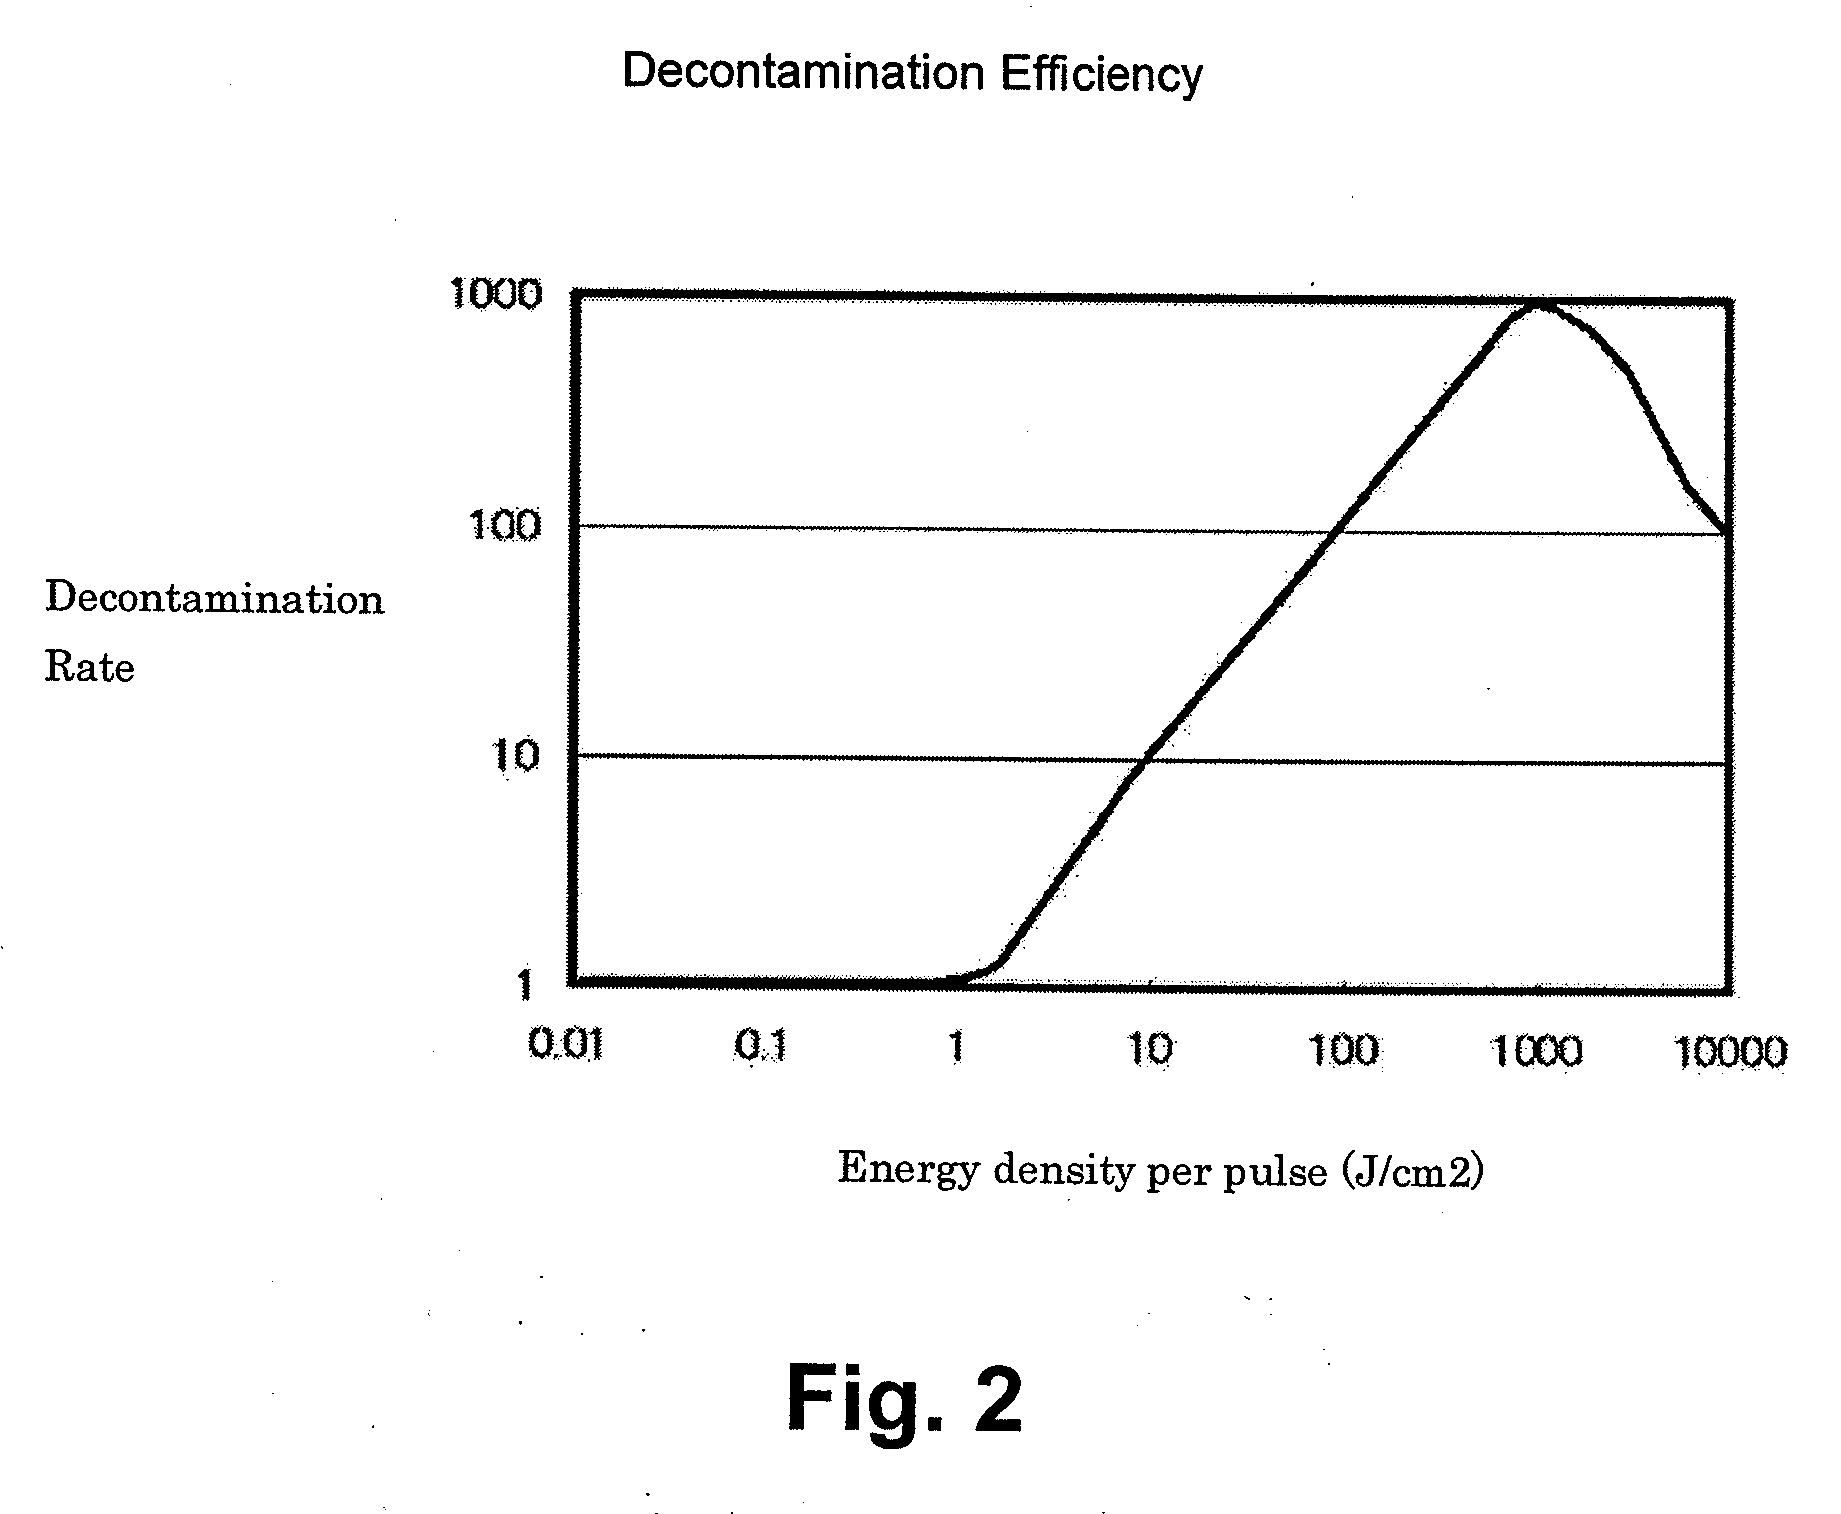 Nuclear decontamination device and a method of decontaminating radioactive materials